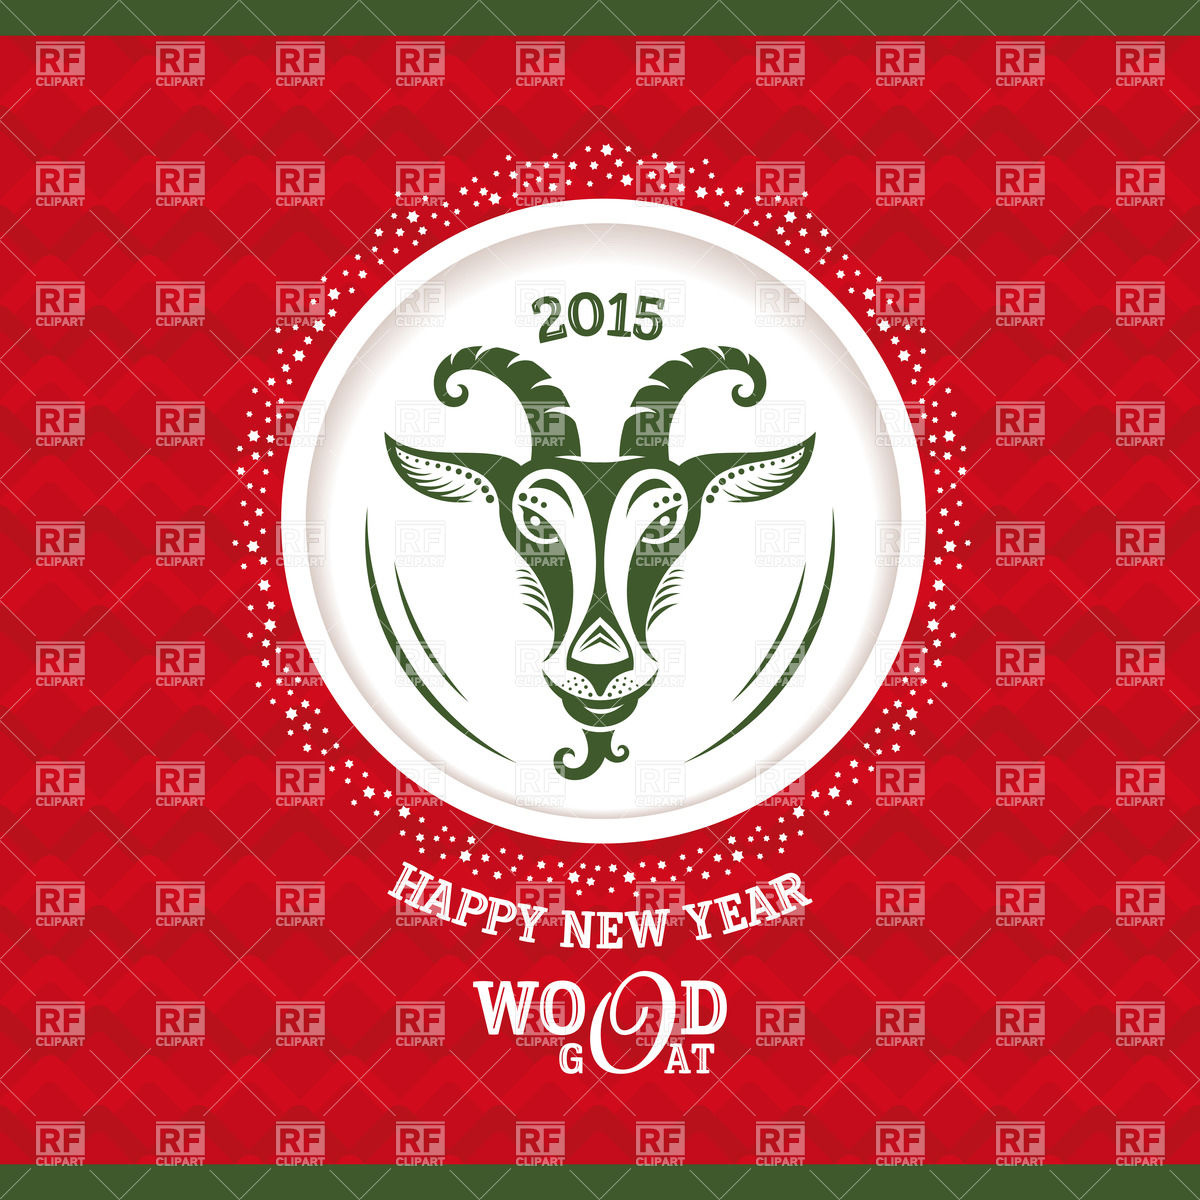 2015 Chinese New Year Greeting Card With Goat In Round Frame Download